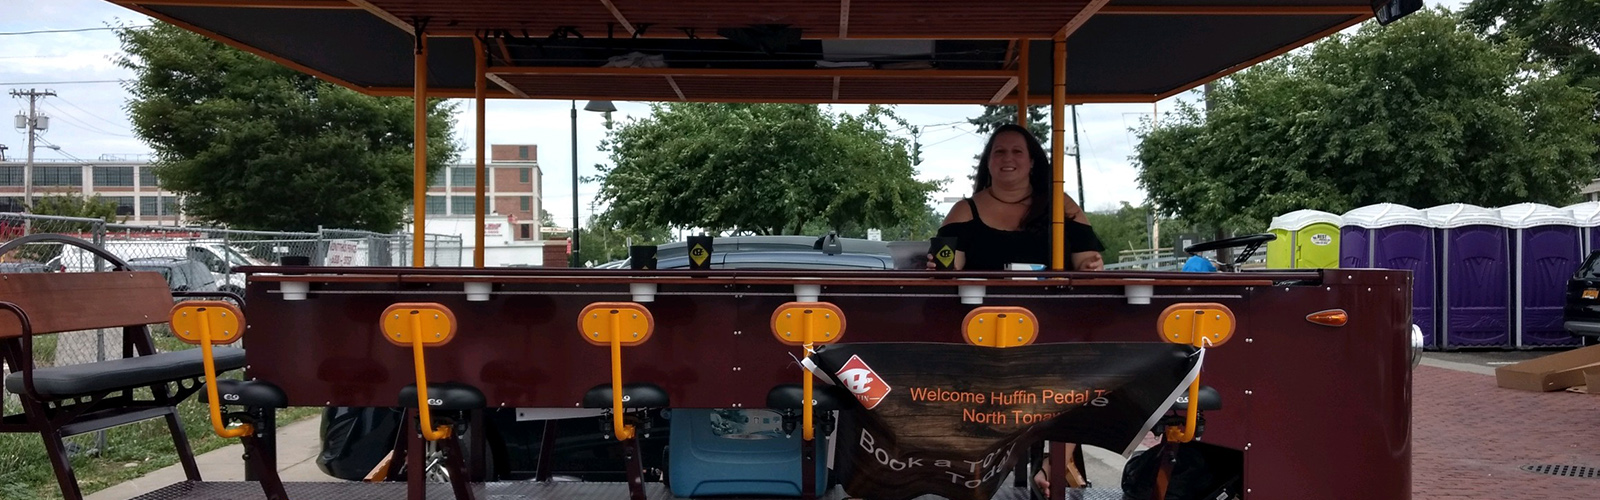 Sarah Ivory, owner of Huffin Pedal Tours, Western New York’s newest Pedal Pub, offers passengers a different way to enjoy North Tonawanda and the Erie Canal.